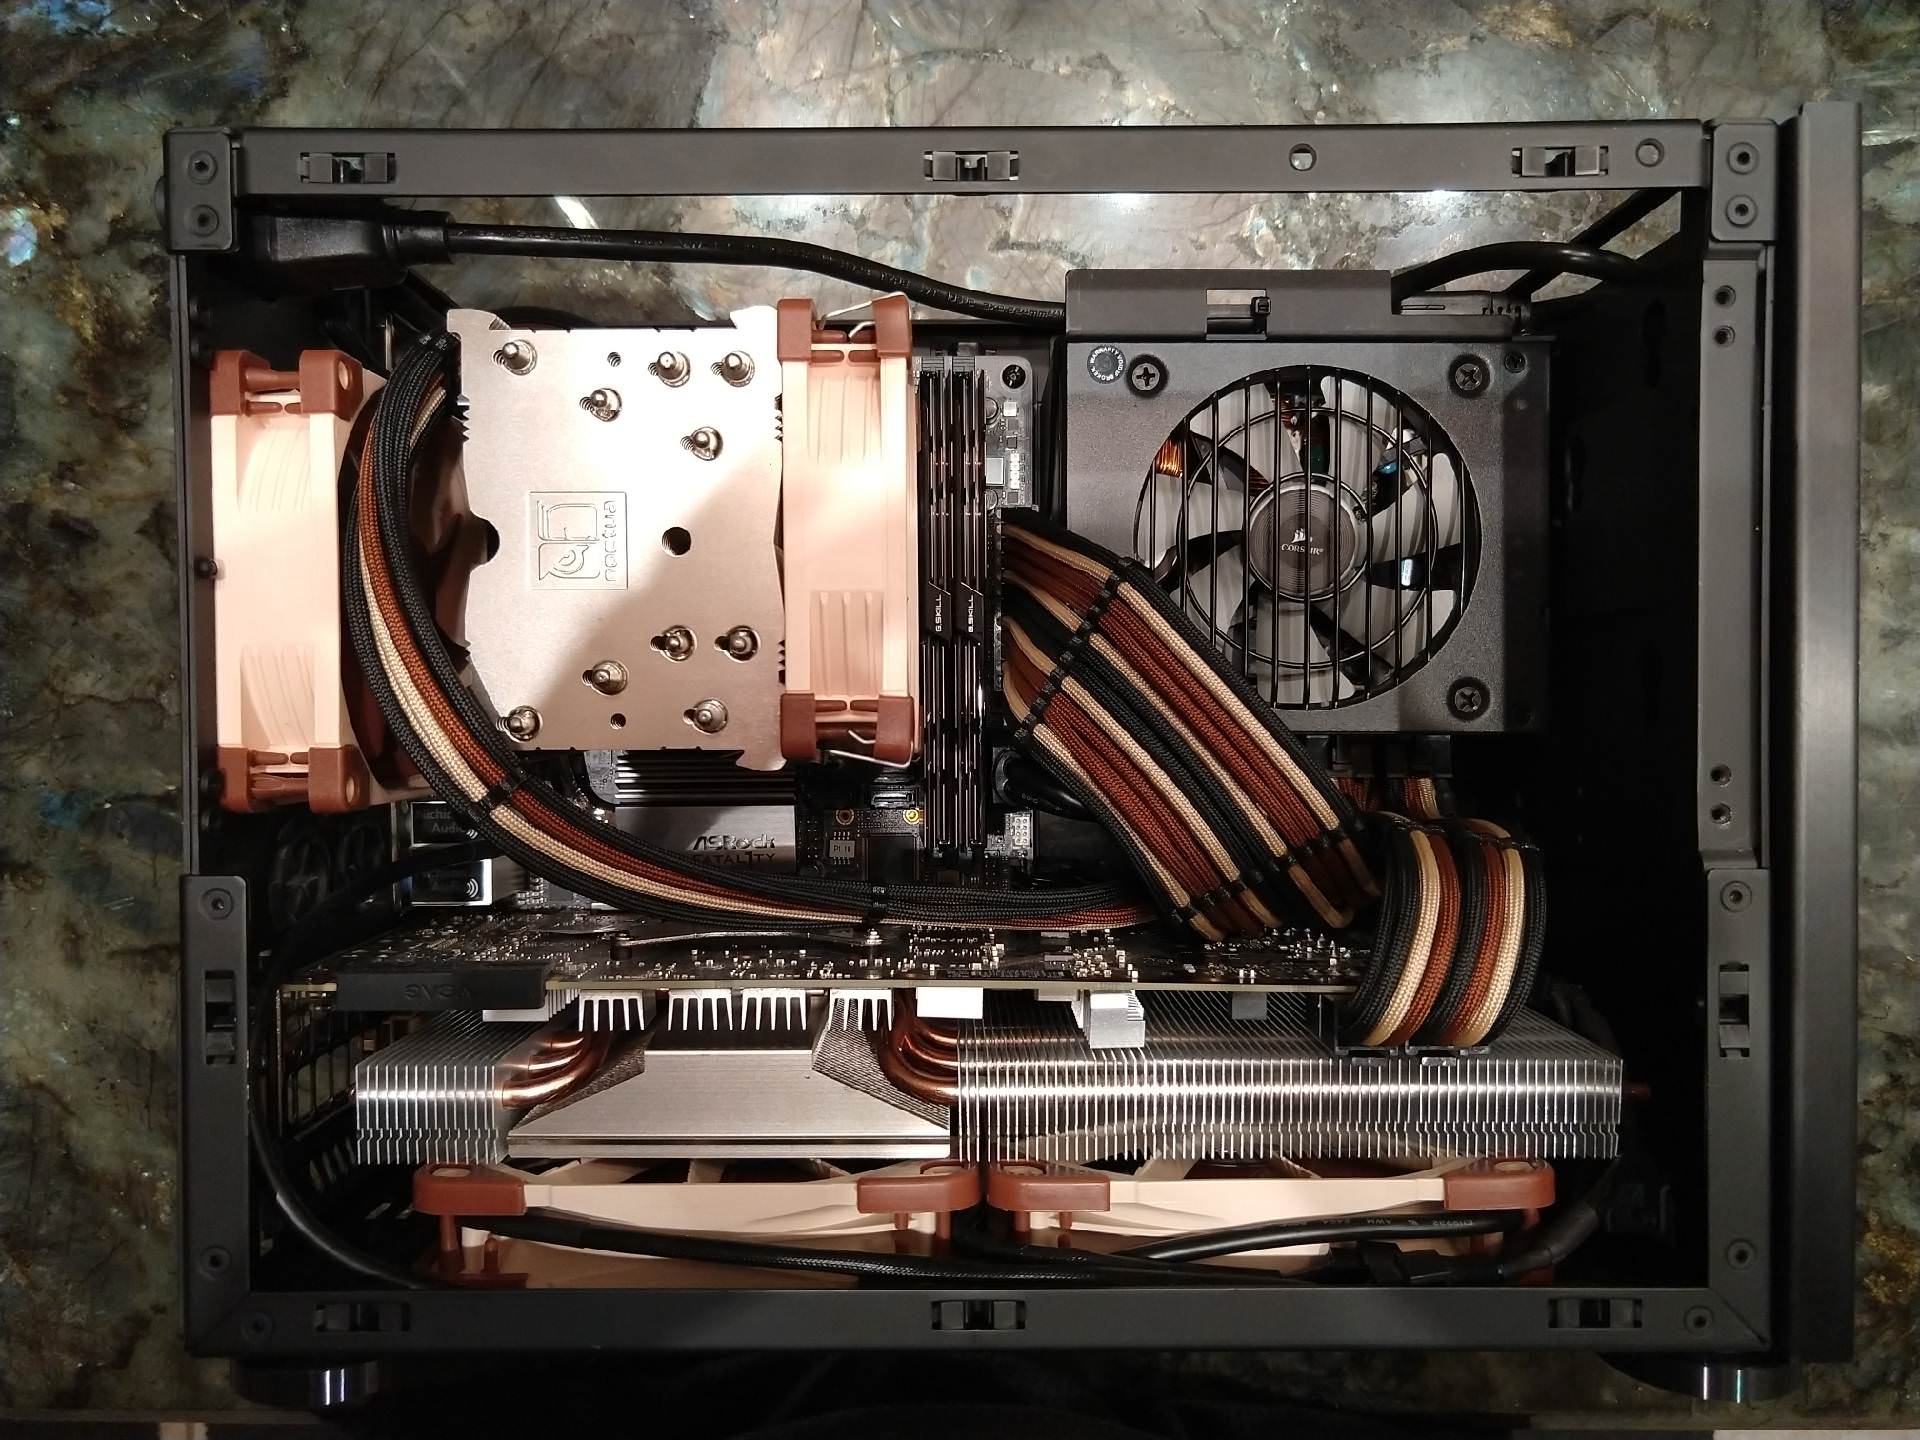 Custom Noctua Themed Cables In My Ncase M1